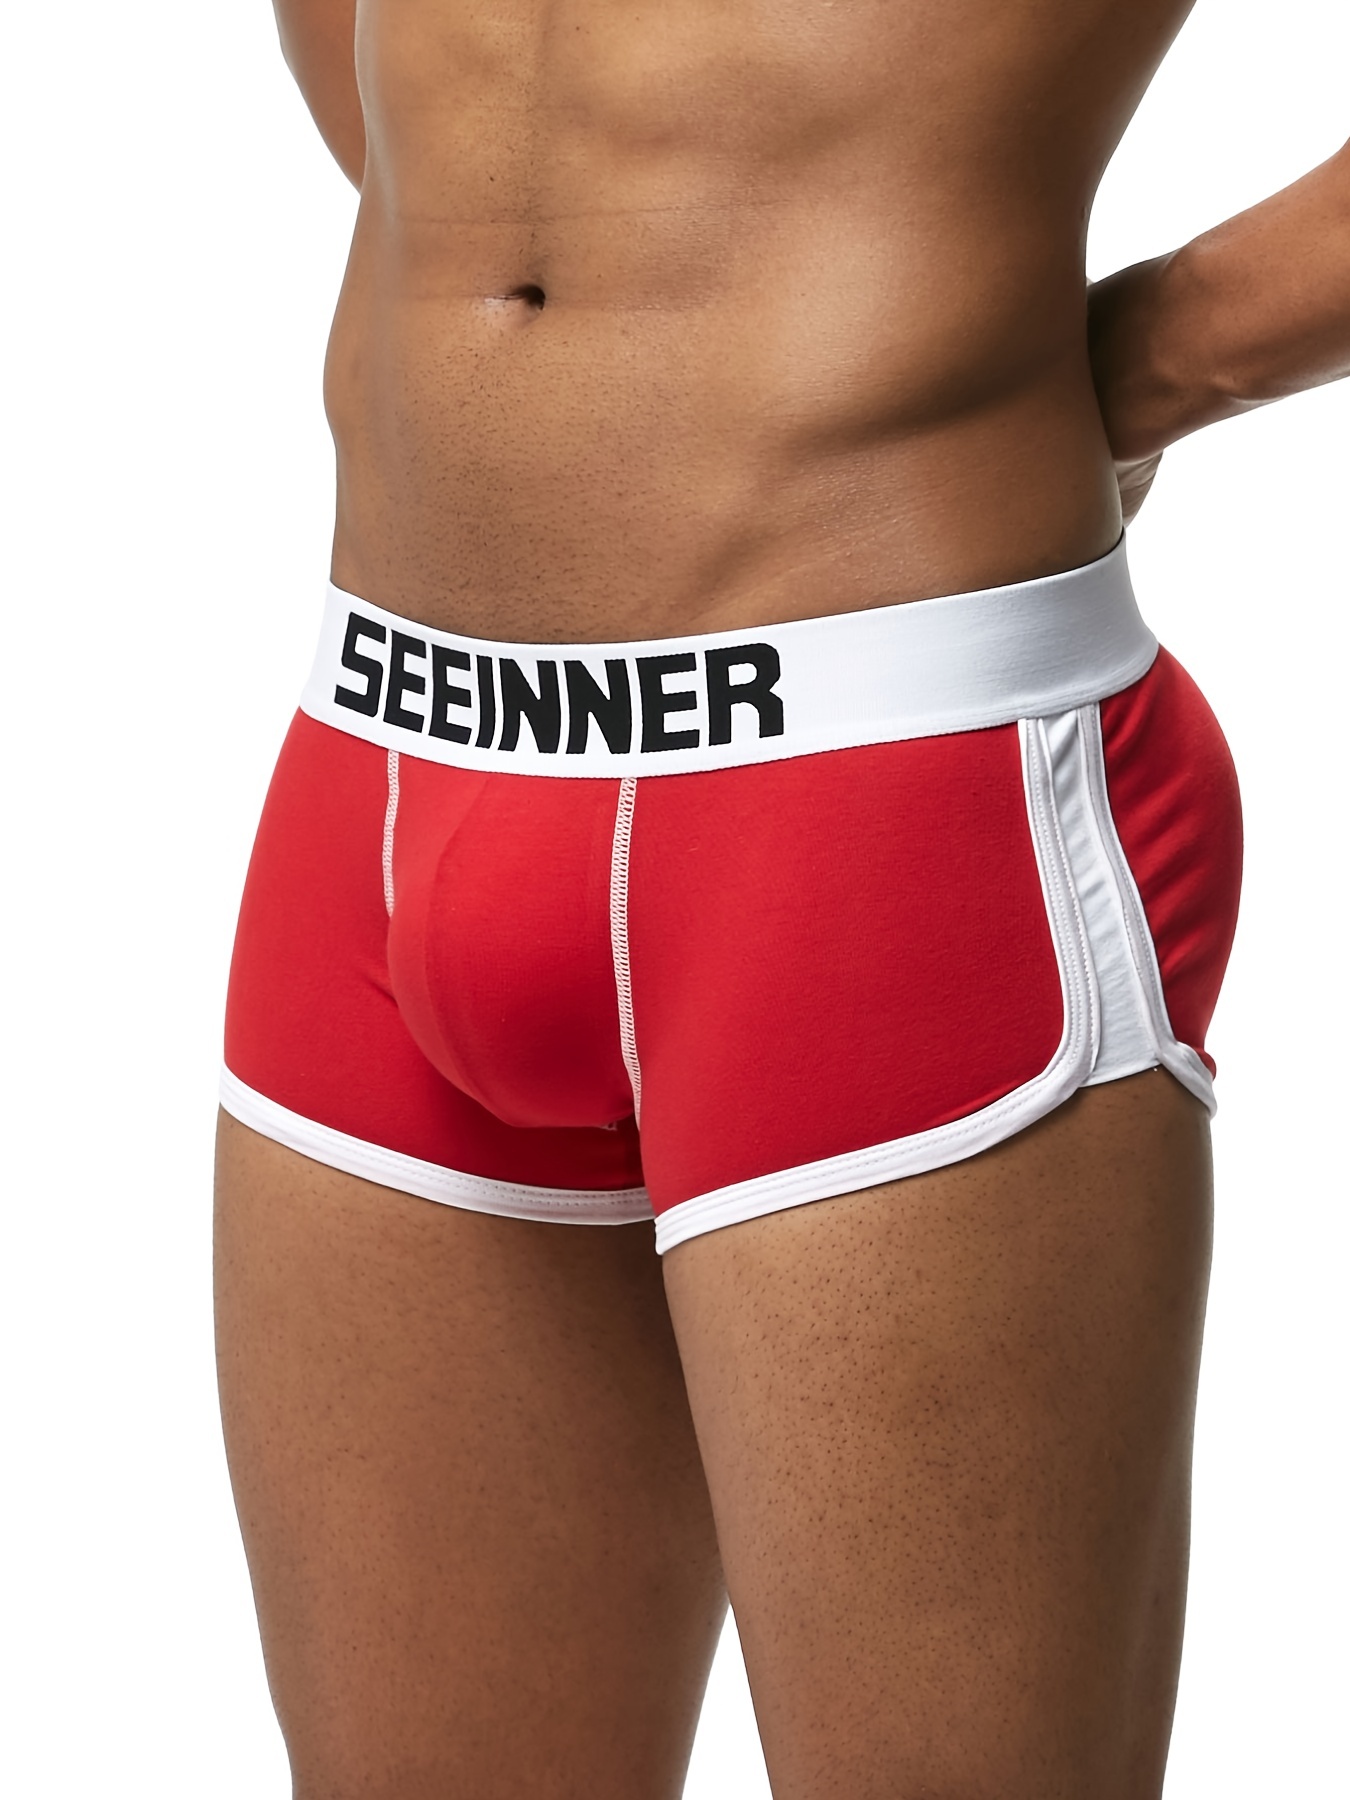 Butt-Enhancing Underwear For Guys Actually Exists - And It's Popular -  Men's Health Magazine Australia